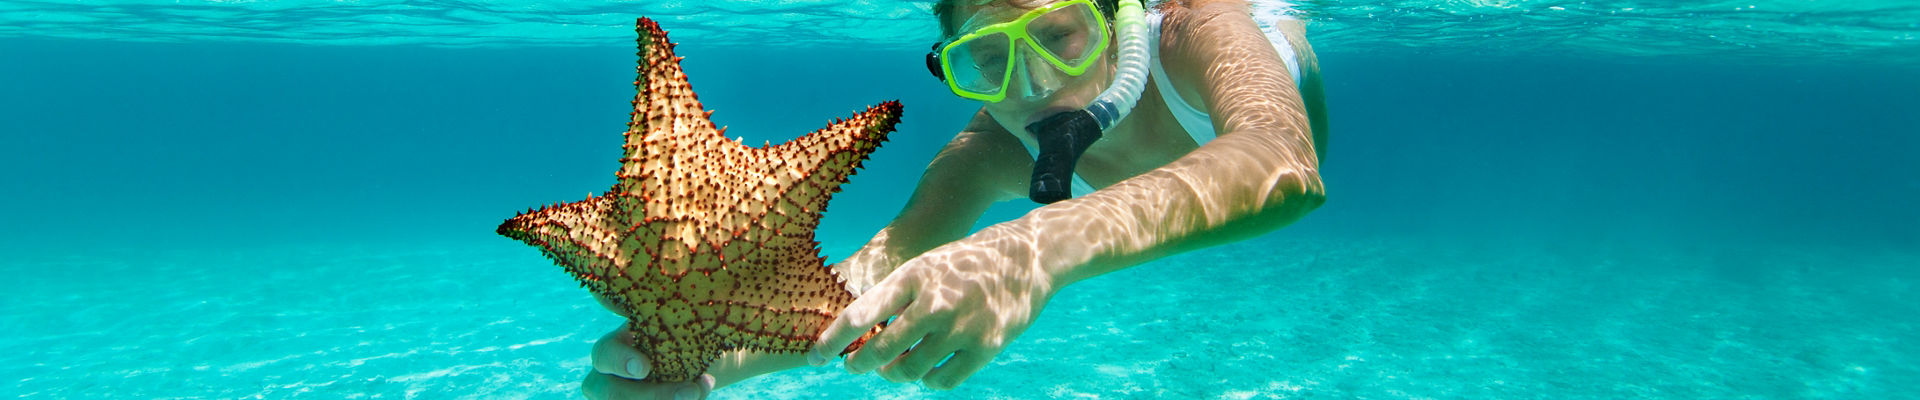 Woman with snorkel and mask holding a starfish